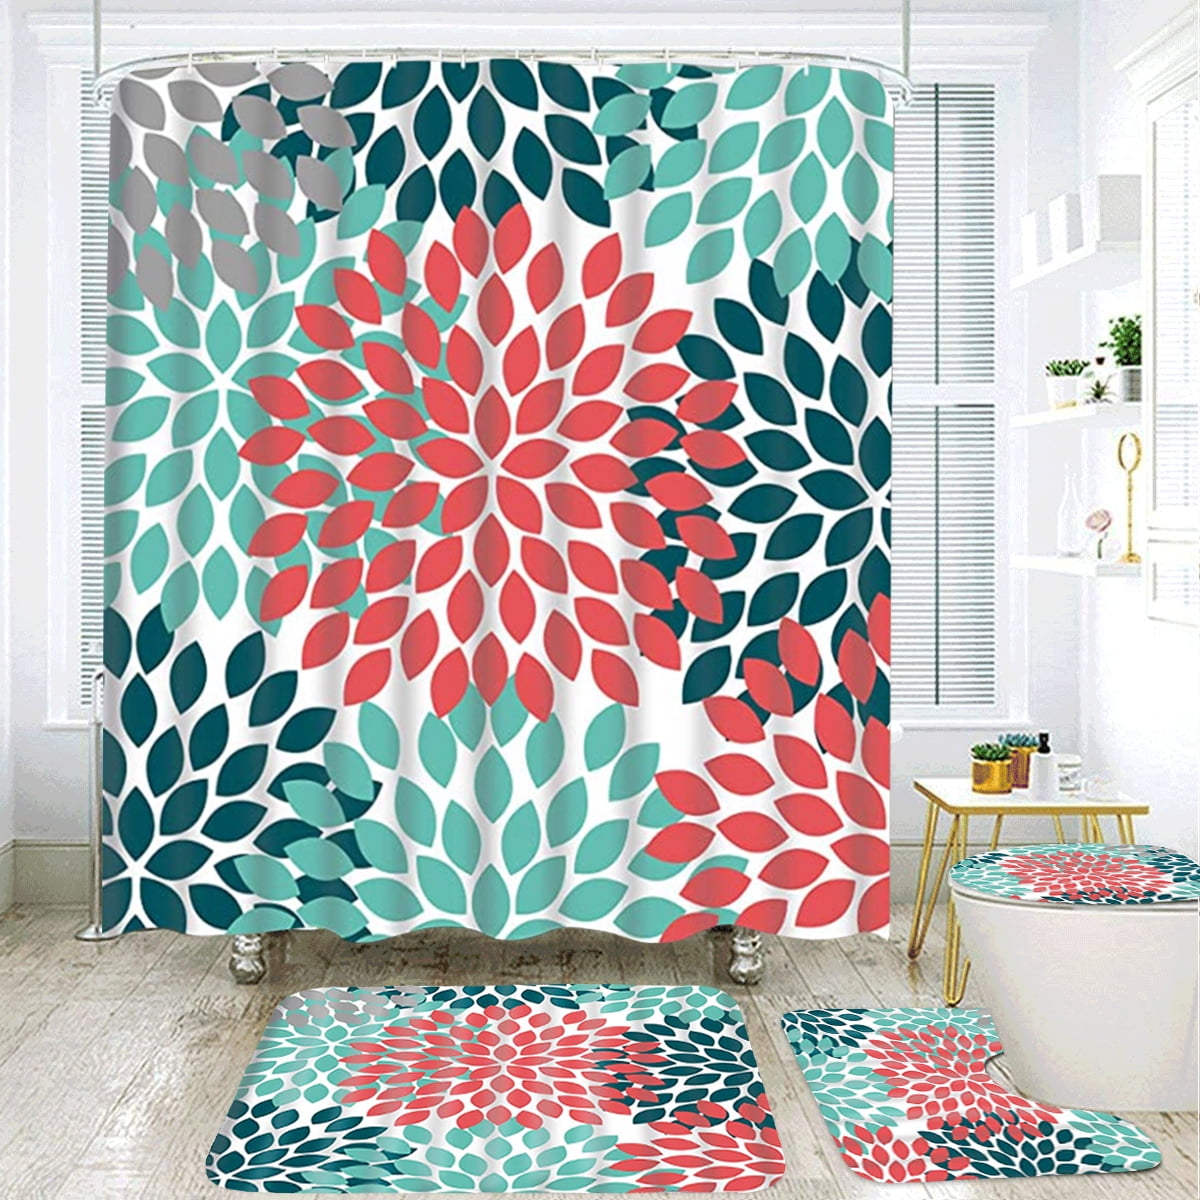 Details about   Nature Red Dahlia Flower Design Bathroom Fabric Shower Curtain Assorted Sizes 